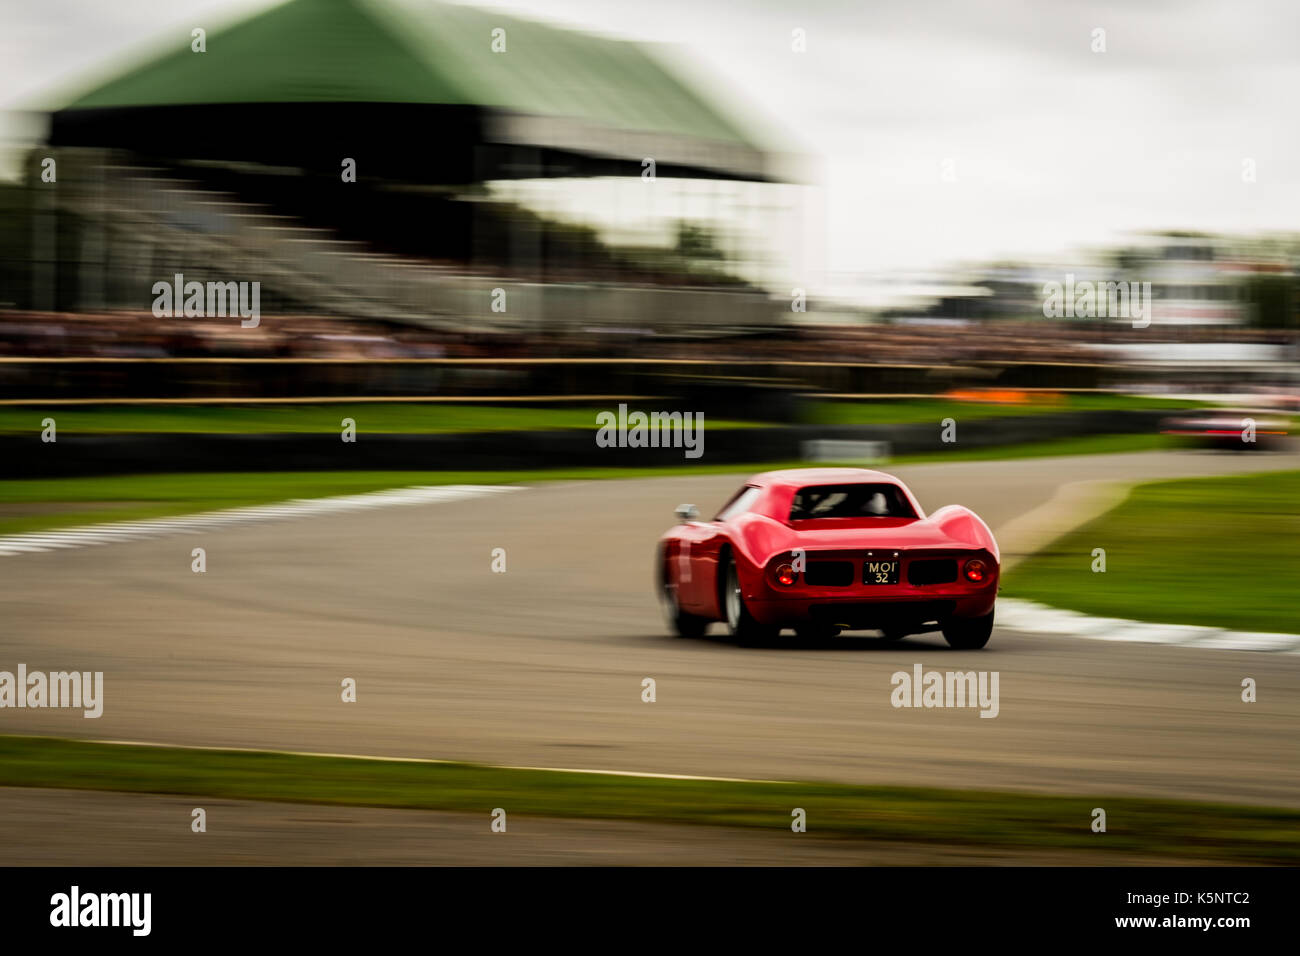 Chichester, West Sussex, UK. 10th September, 2017. Gary Pearson / Chris Harris drives a Ferrari 250 LM during the Goodwood Revival at the Goodwood Circuit (Photo by Gergo Toth / Alamy Live News) Stock Photo